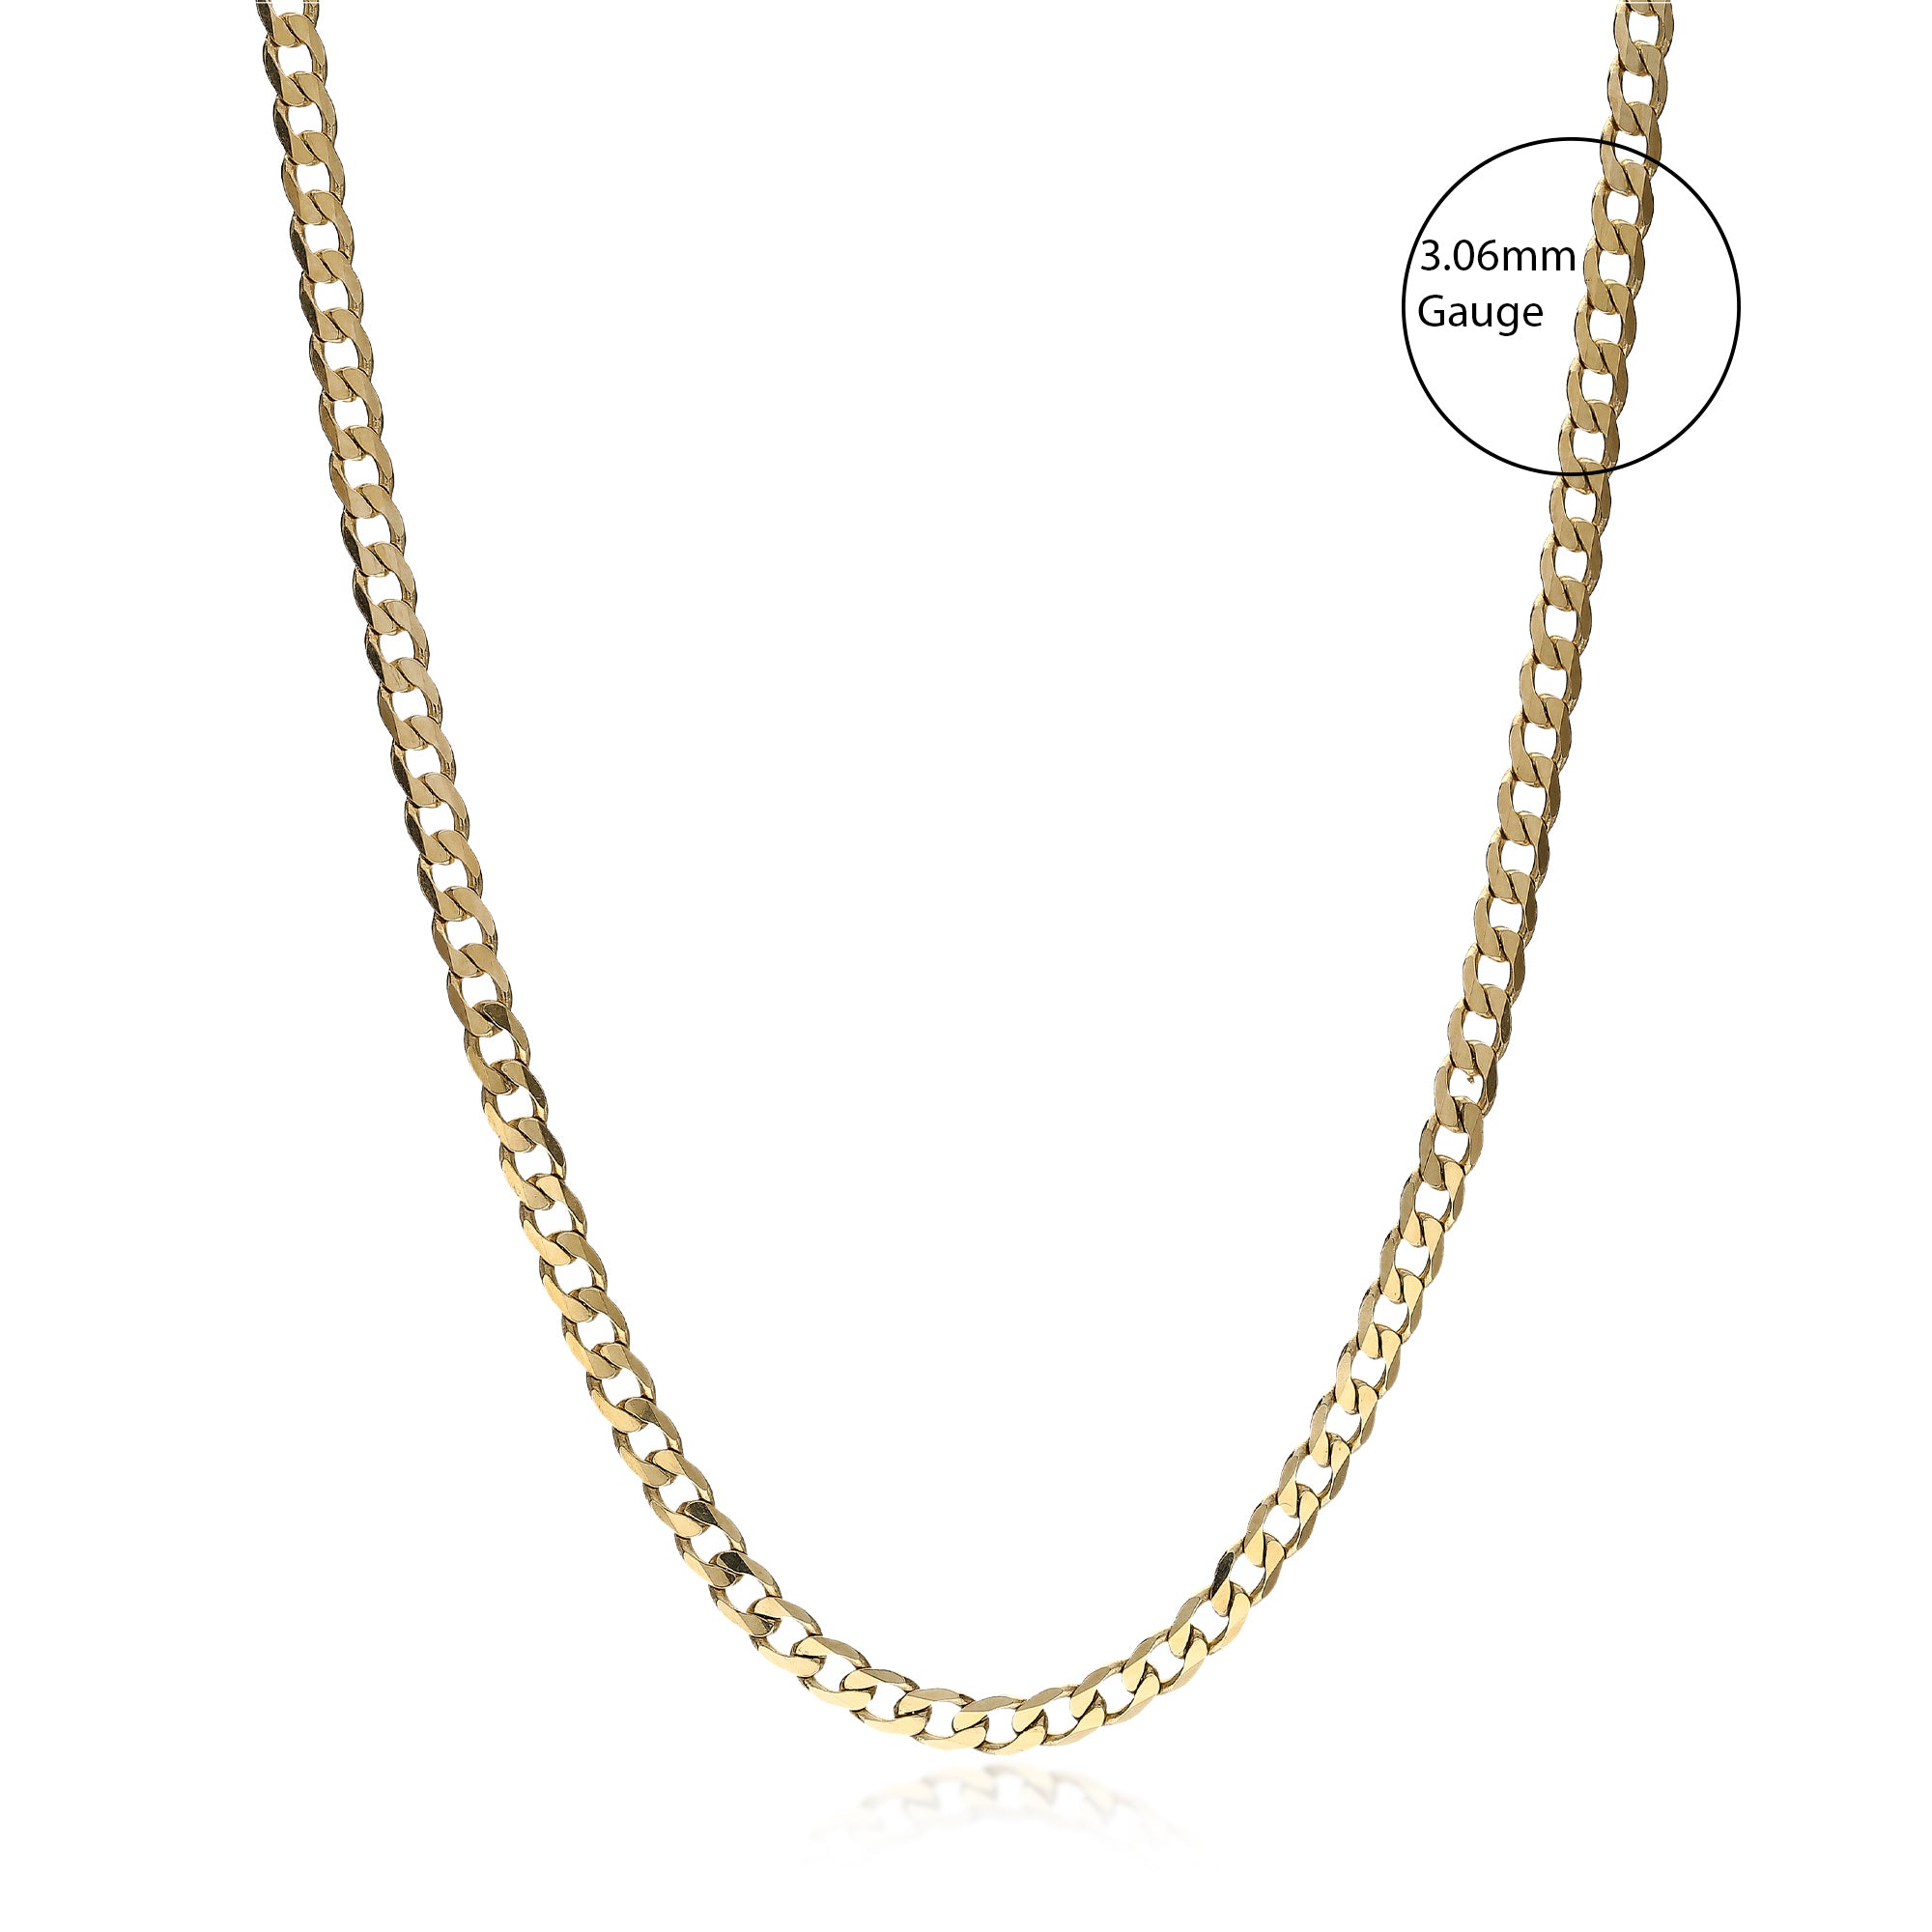 9ct Yellow Gold Heavy Curb Chain 3.06mm 20"